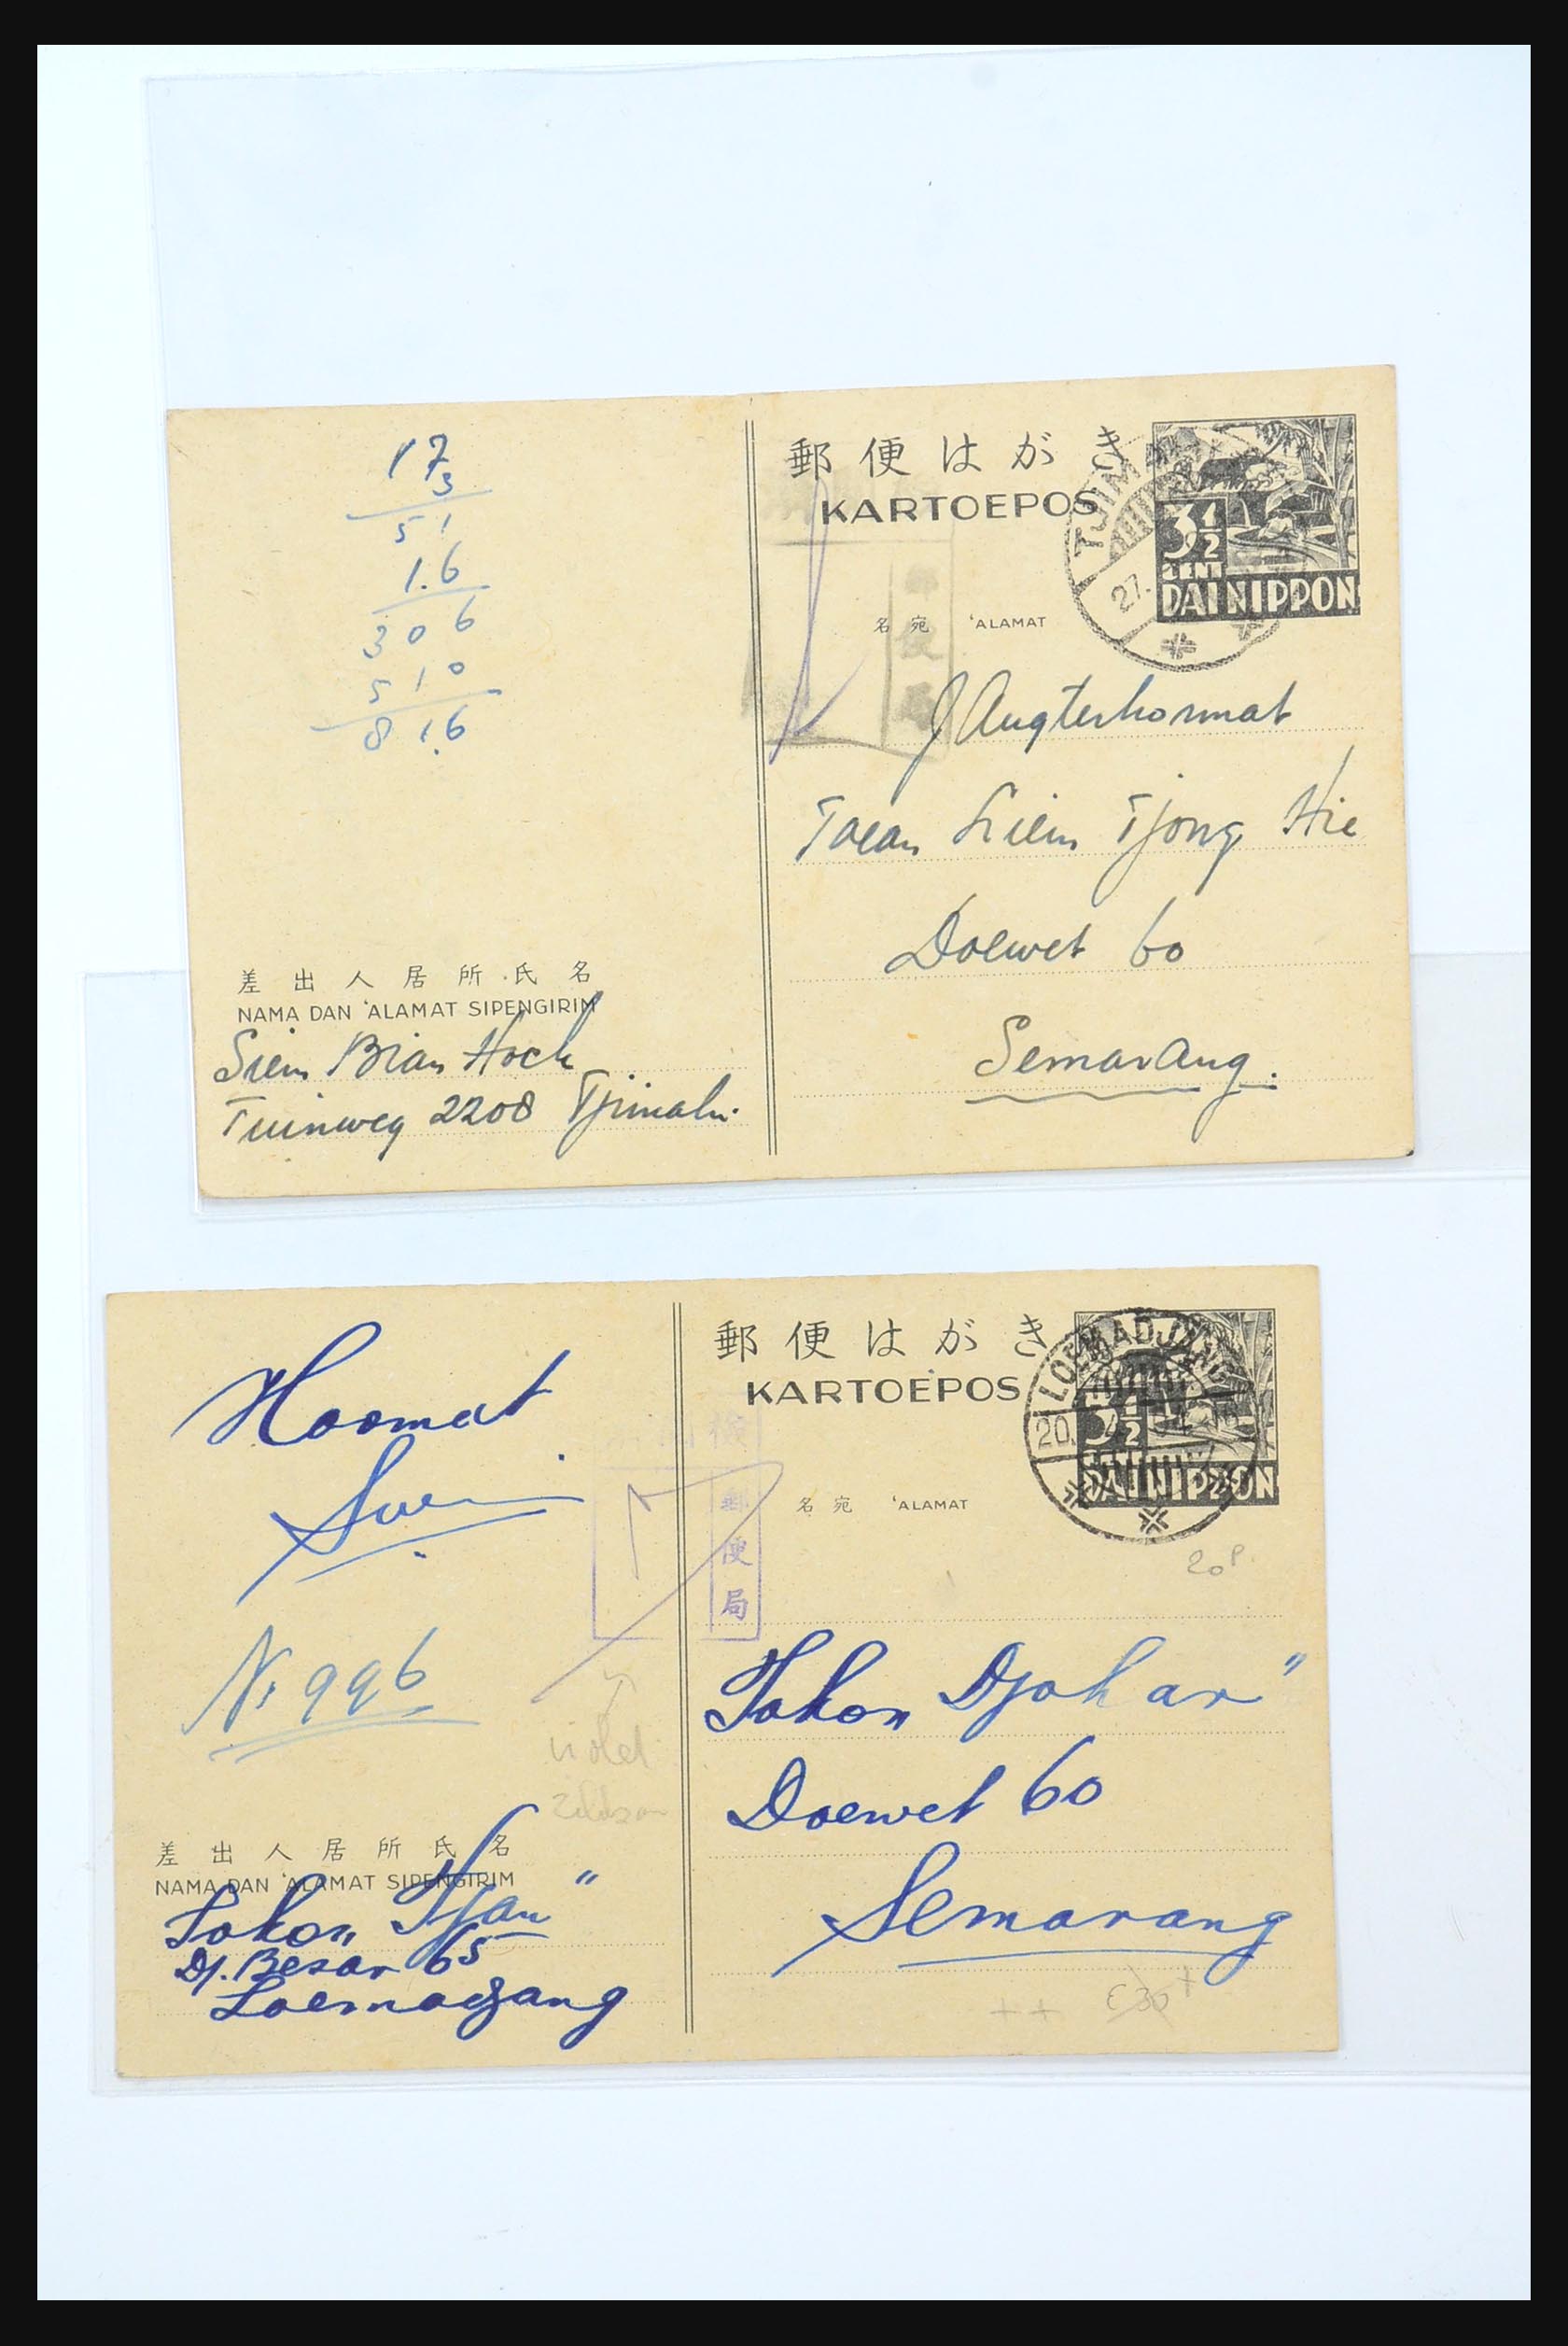 31362 098 - 31362 Netherlands Indies Japanese occupation covers 1942-1945.